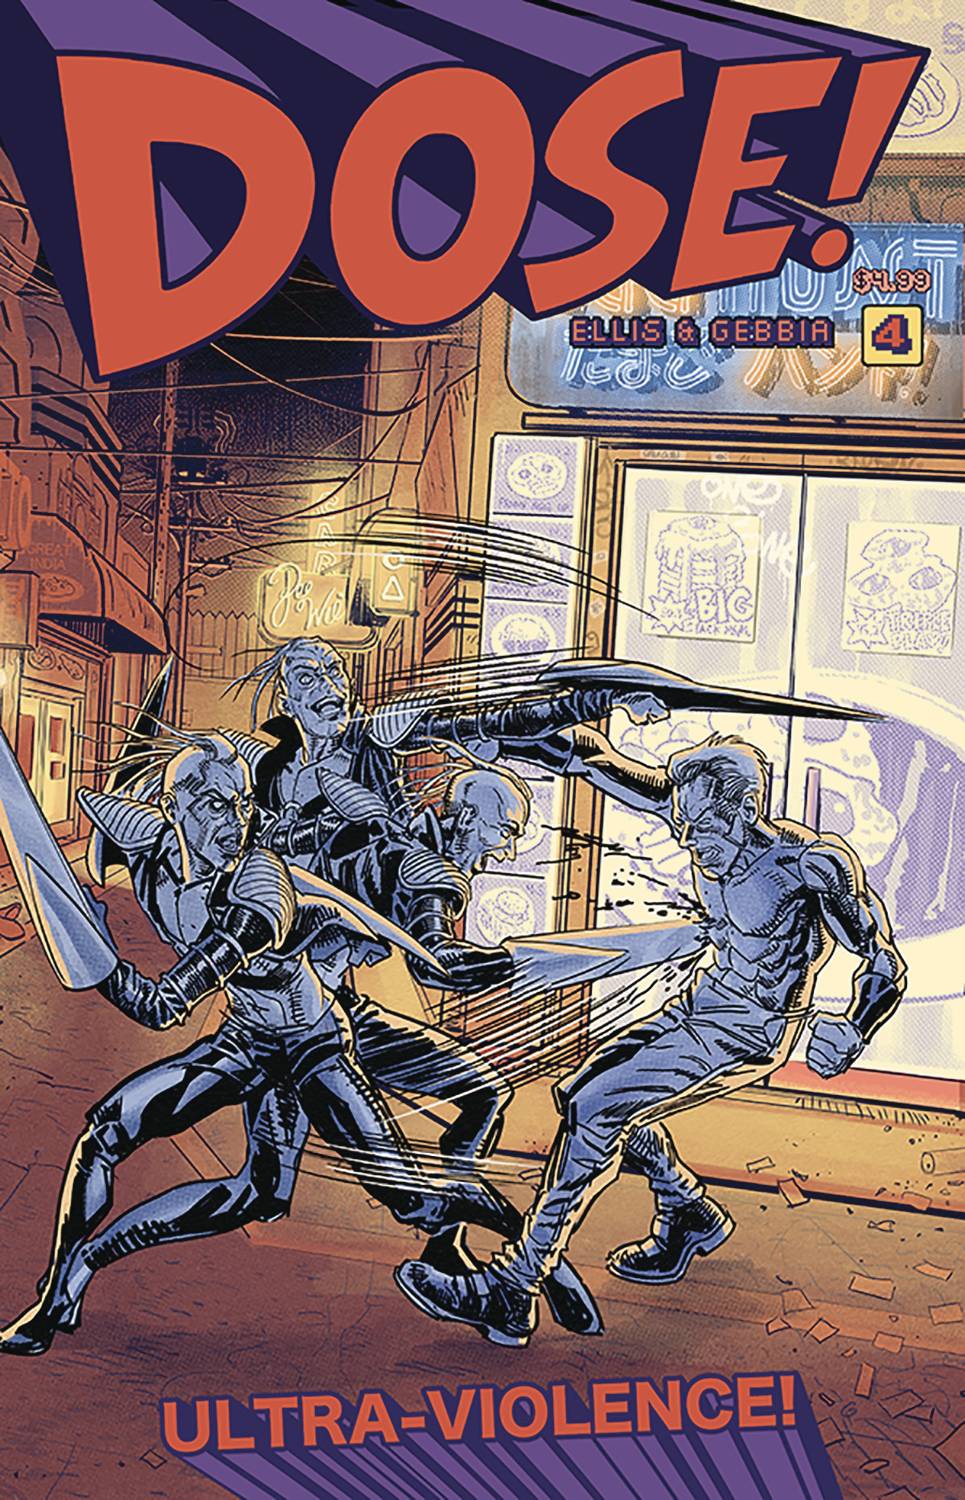 Image of DOSE! #4 (COVER A)